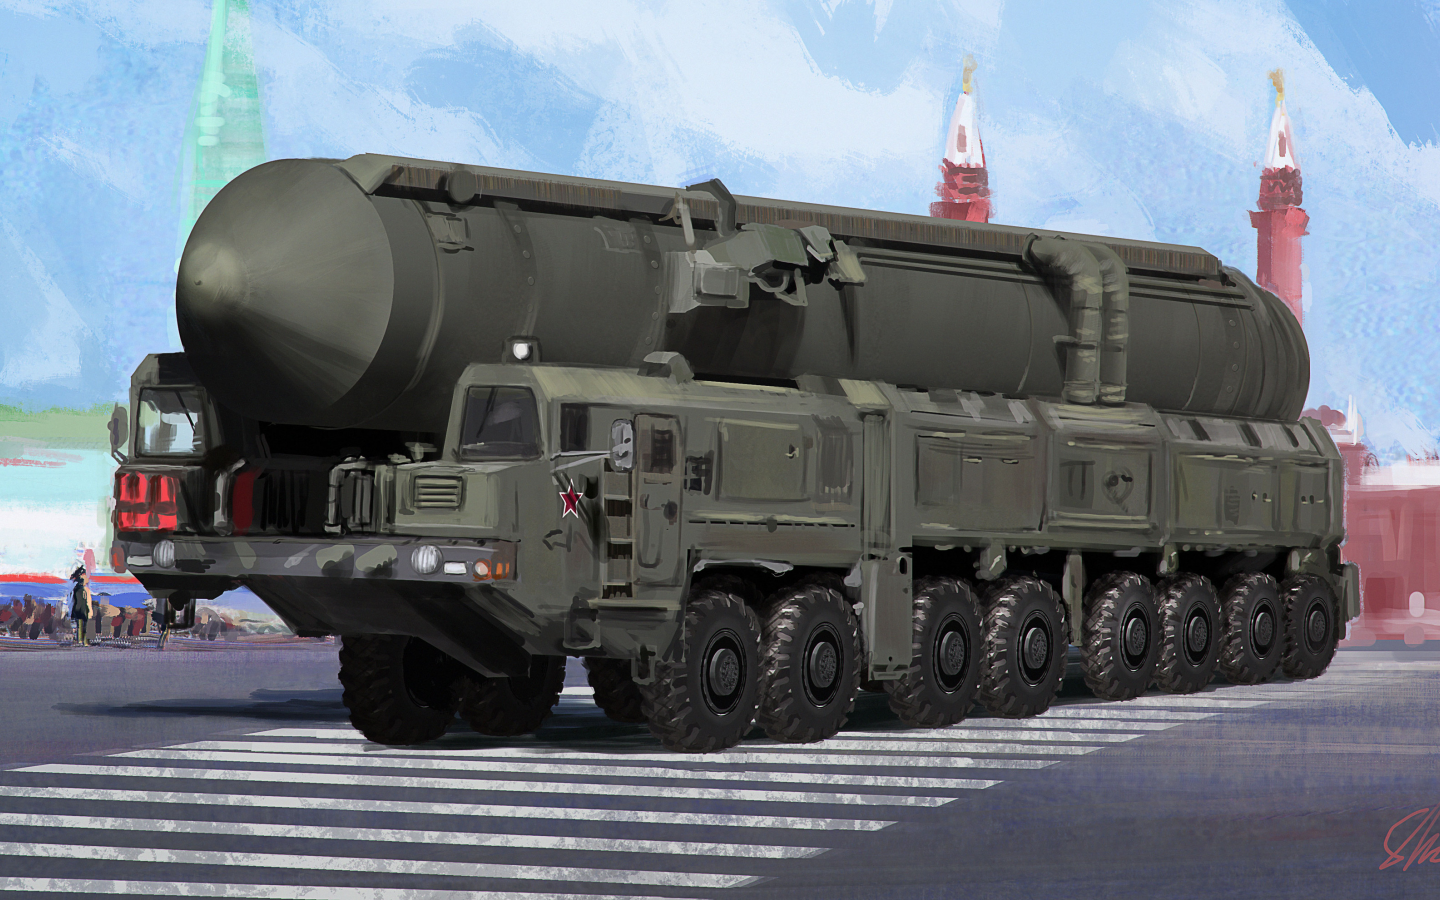 weapon, missile, ballistic missile, sarmatian, missile system, drawing